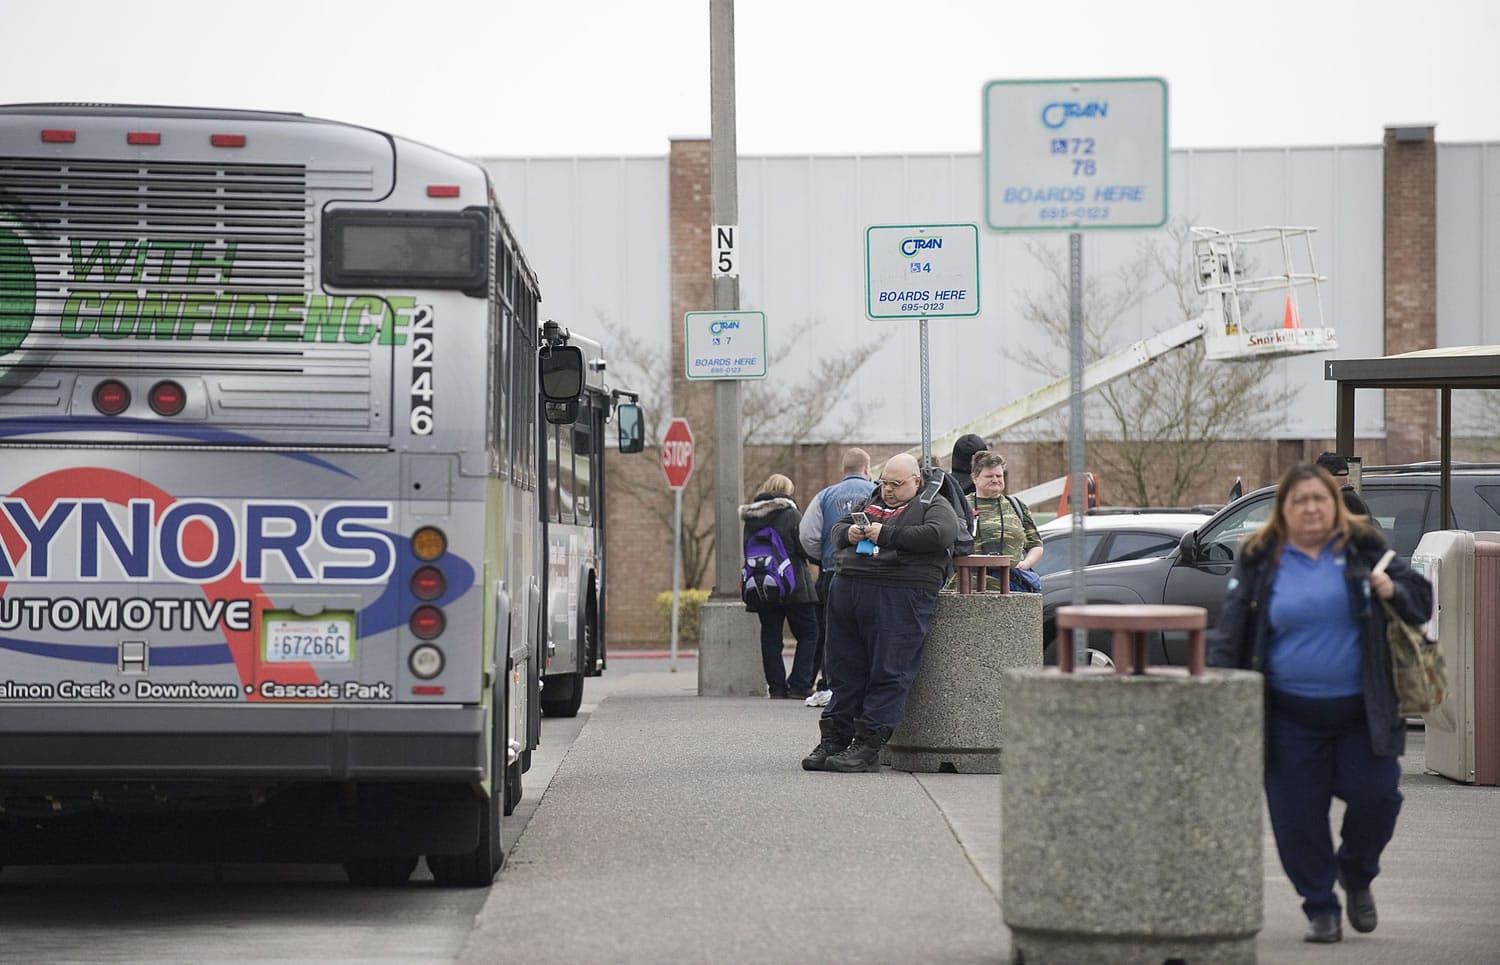 Passengers wait to board C-Tran buses at the Vancouver Mall Transit Center in April.